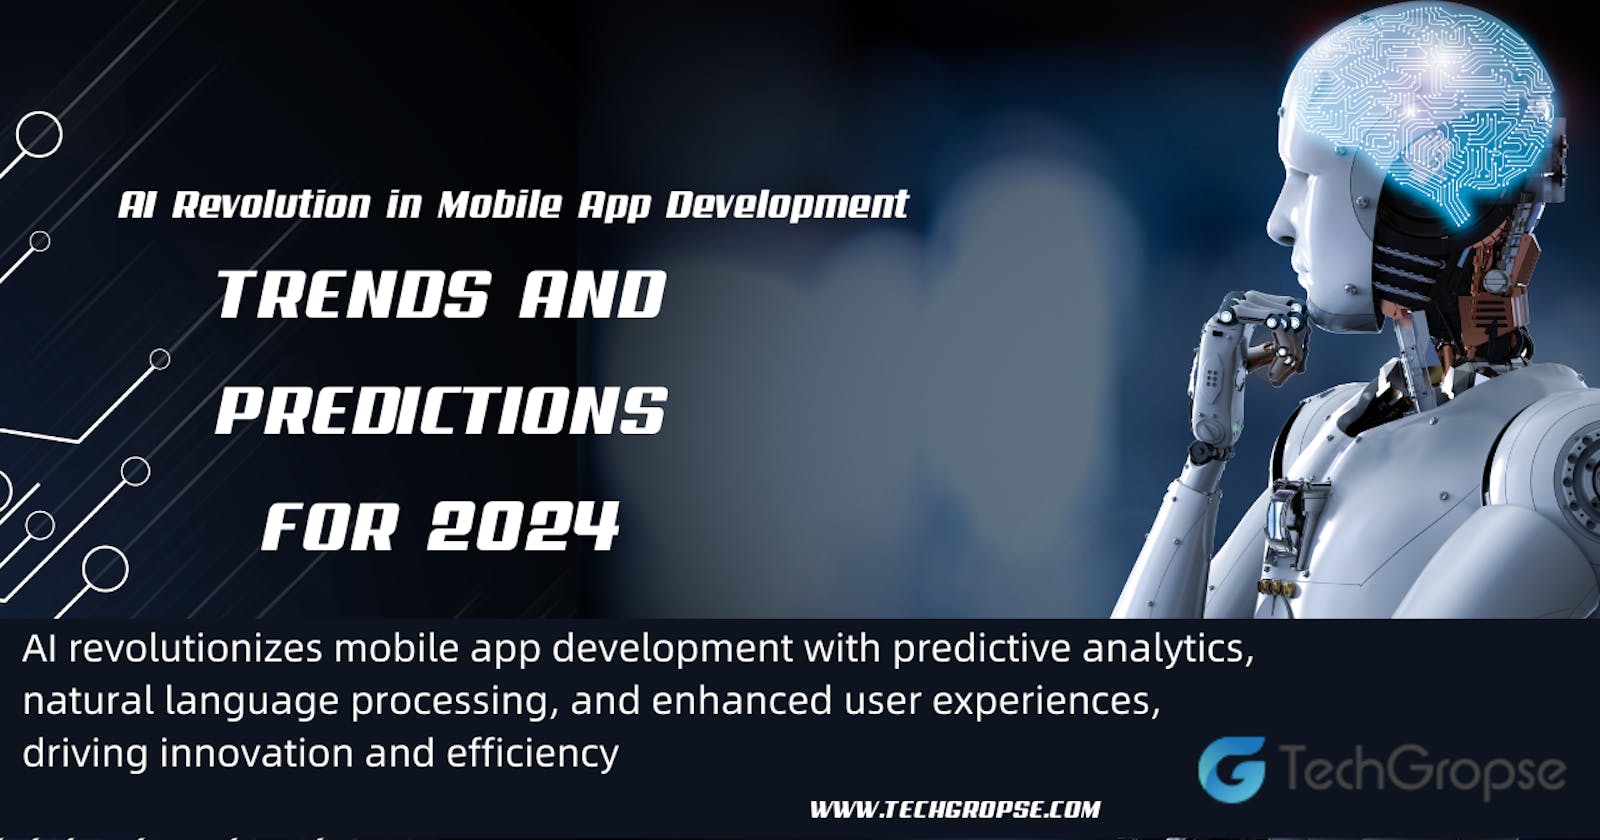 2024 Mobile App Development: AI Revolution Trends and Predictions Unveiled